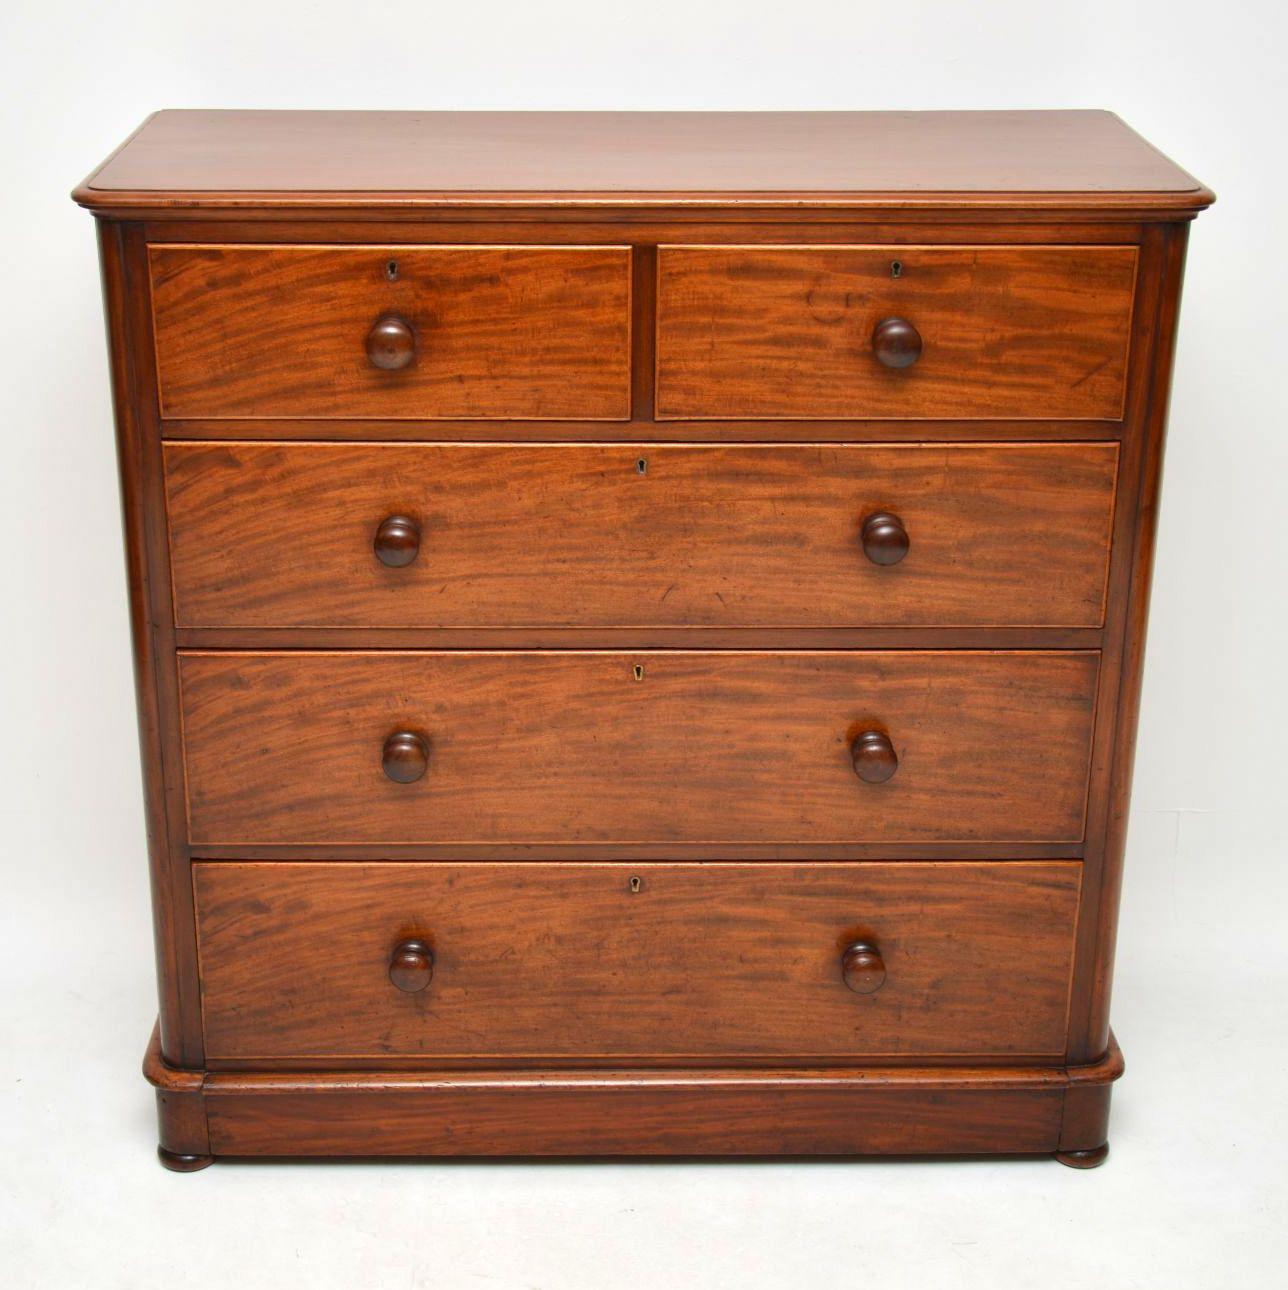 Large antique Victorian mahogany chest of drawers in excellent original condition and of very high quality. It has a solid mahogany top, curved corners, deep graduated drawers with turned bun handles, locks and Fine dovetails. We have made sure that